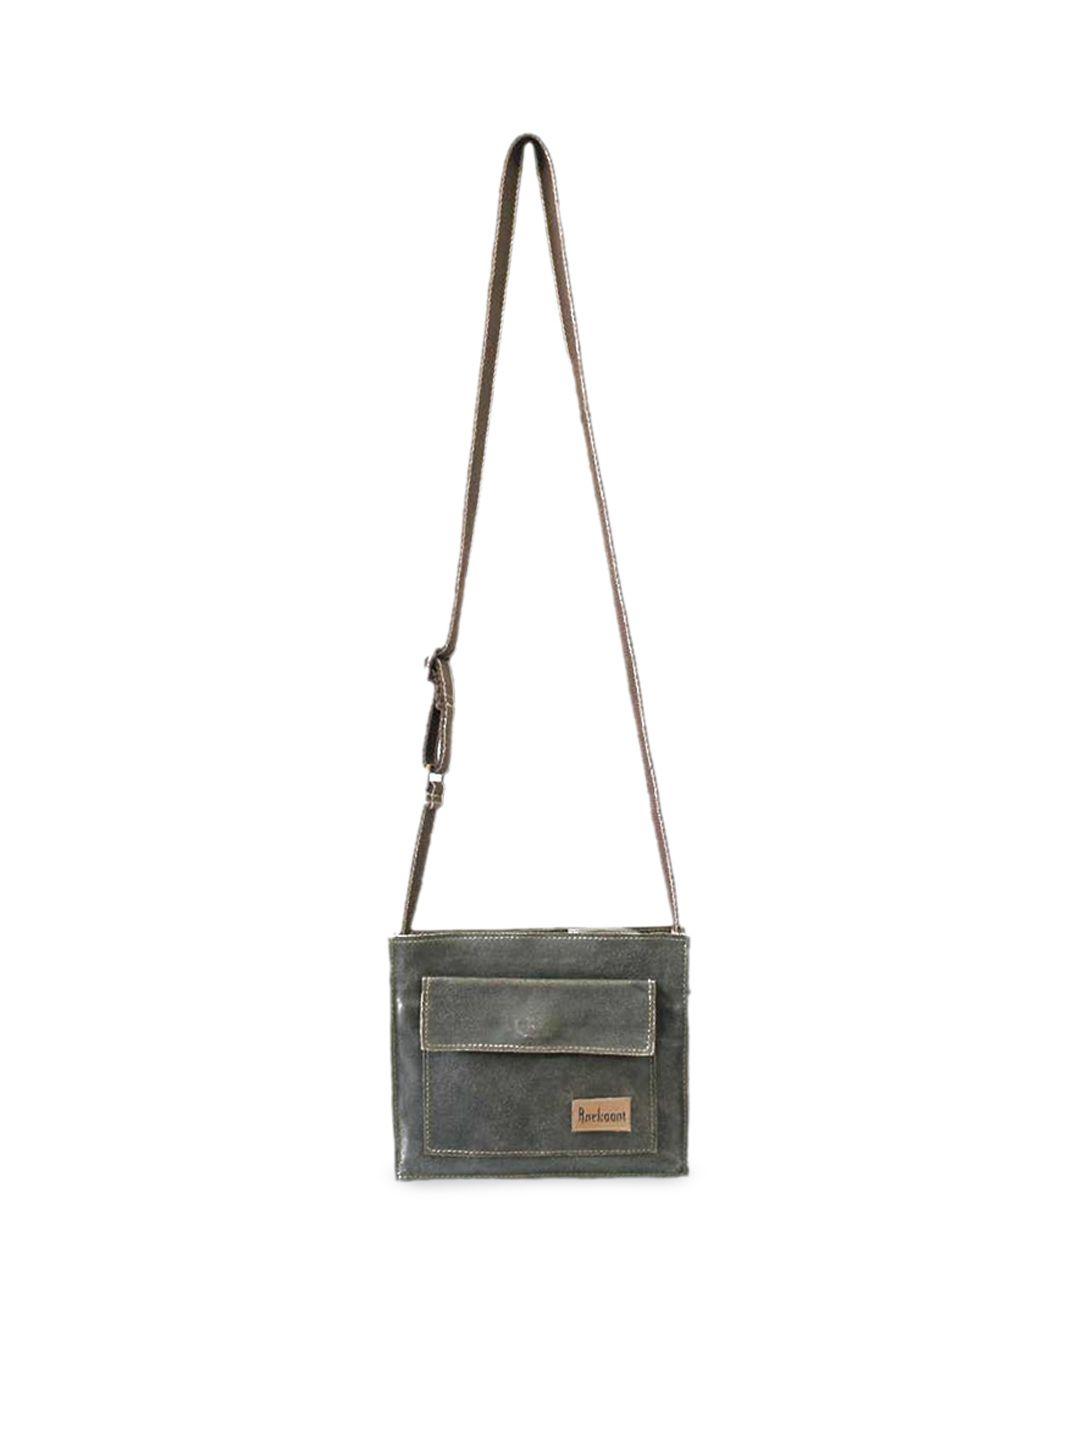 anekaant brown textured leather structured sling bag